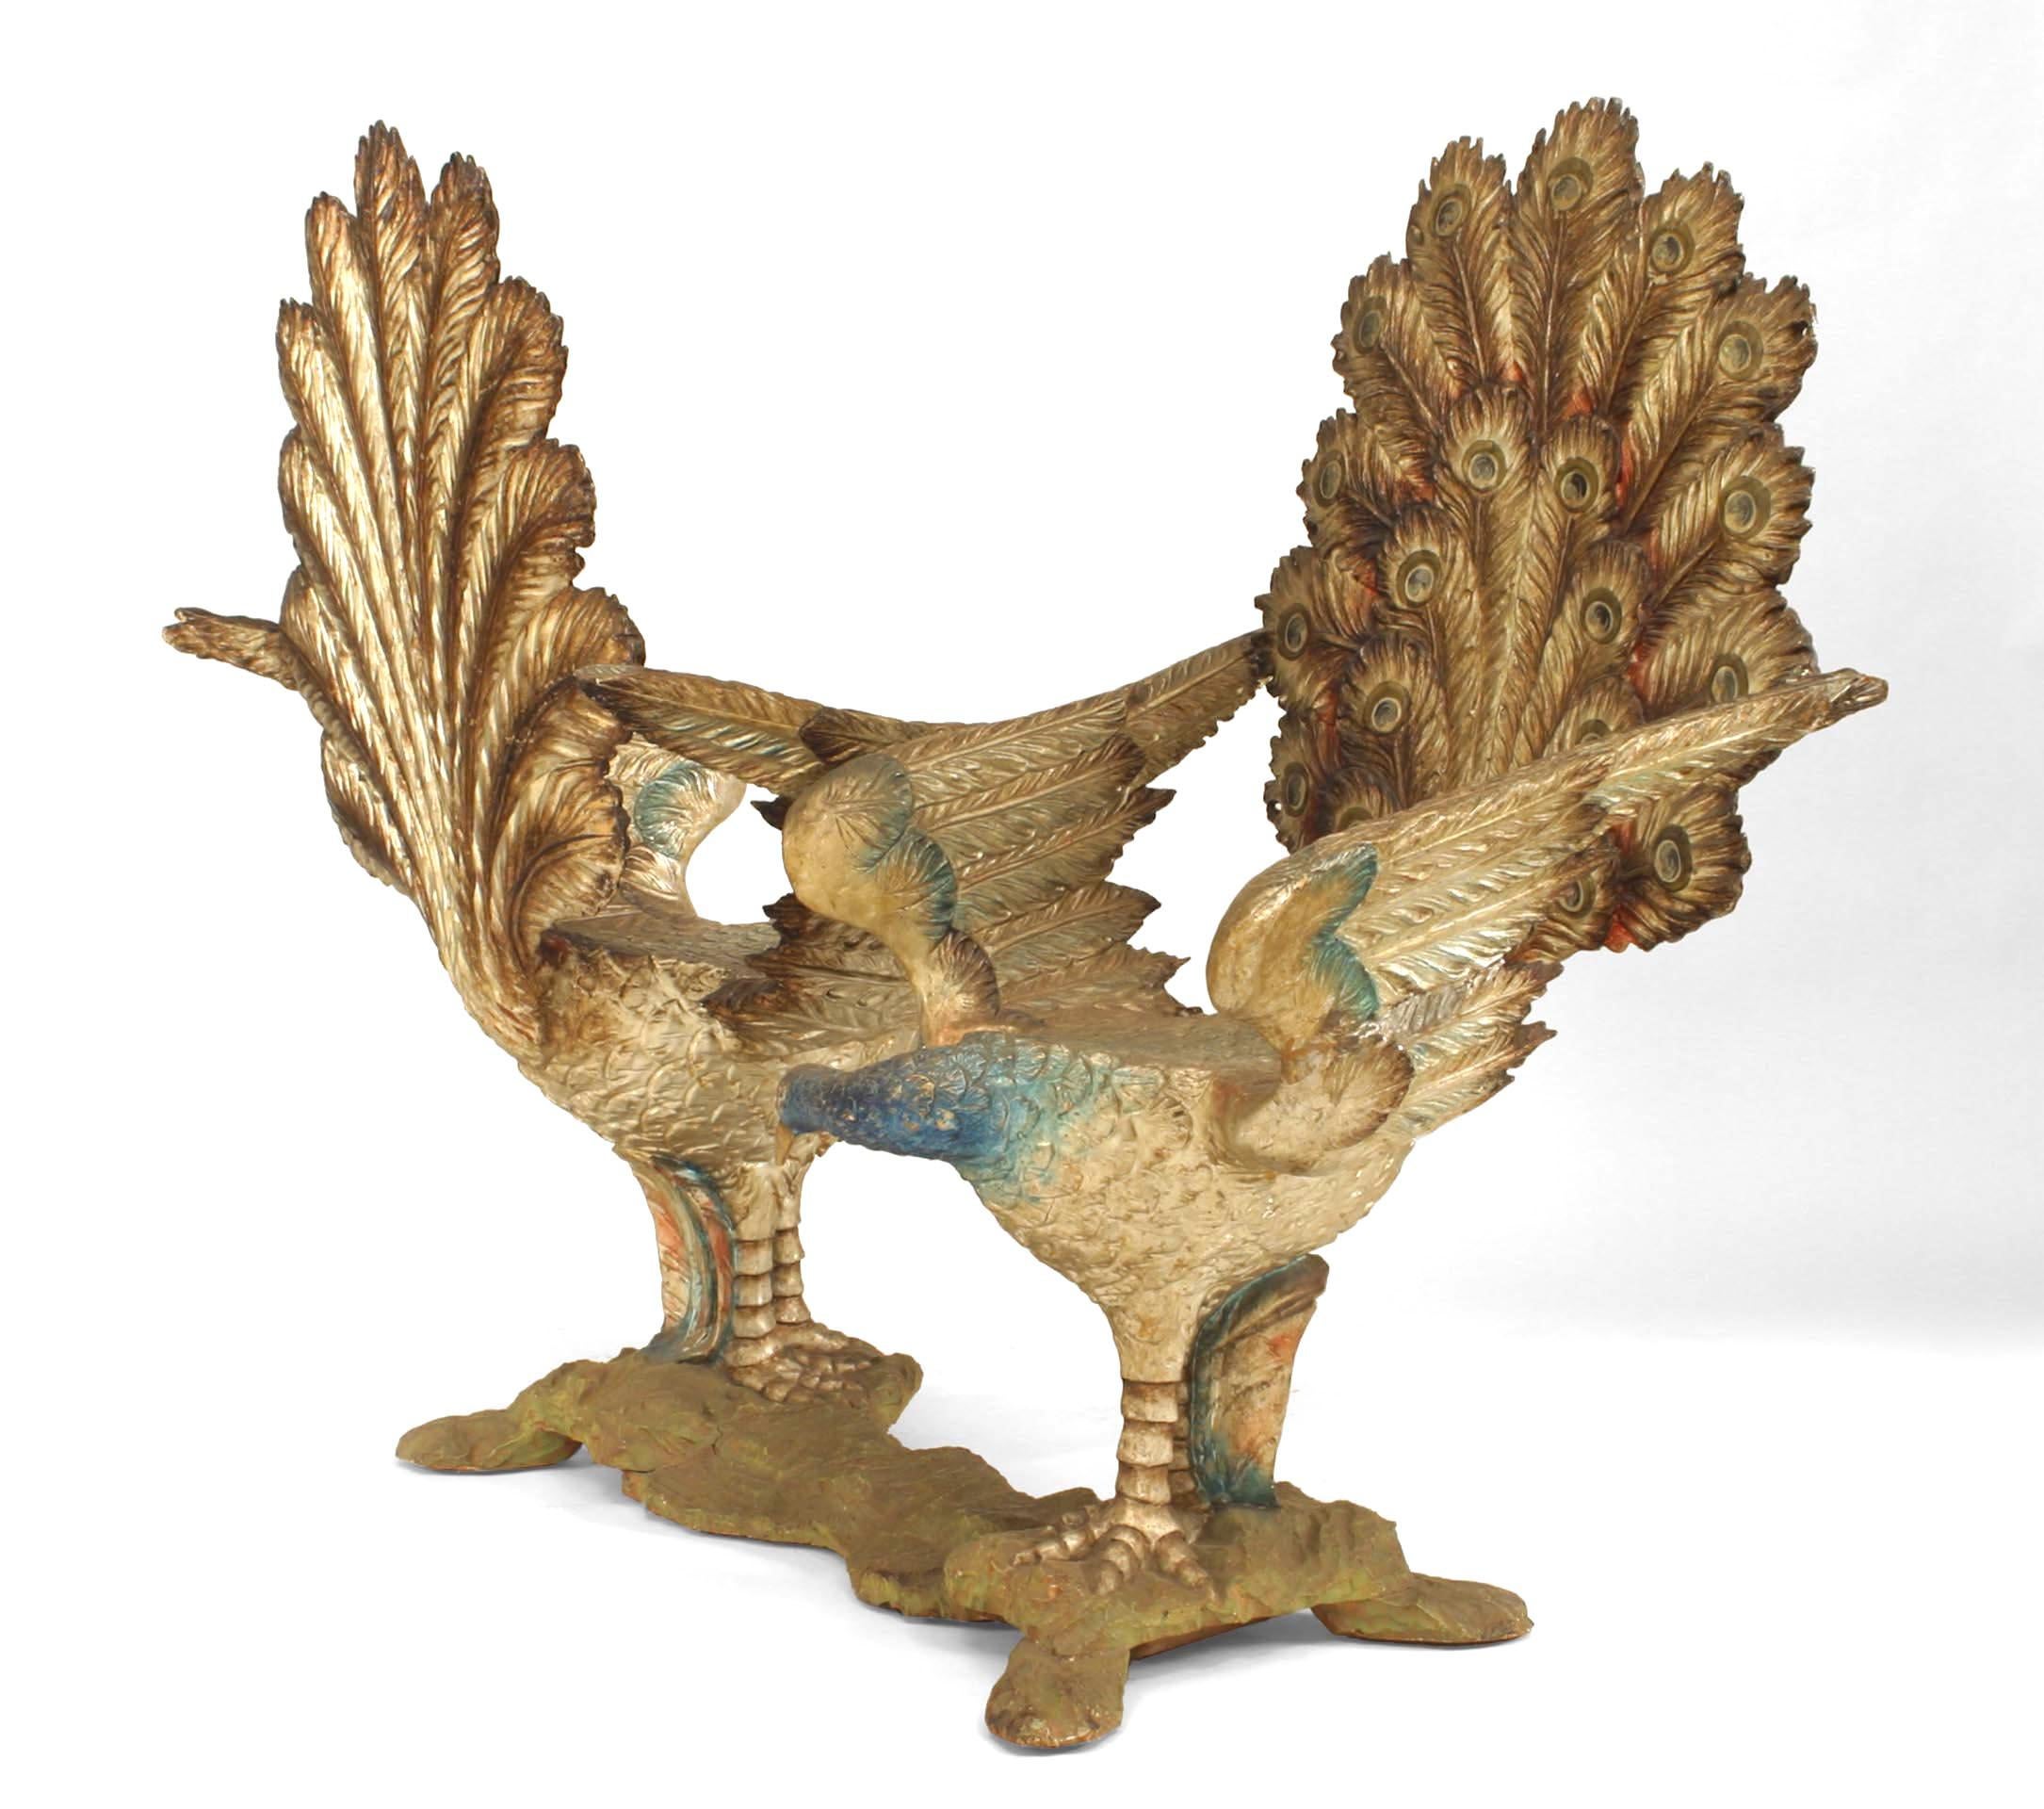 Italian Venetian style (19th cent.) Grotto carved and polychromed double peacock design conversation seat (tete-a-tete)
